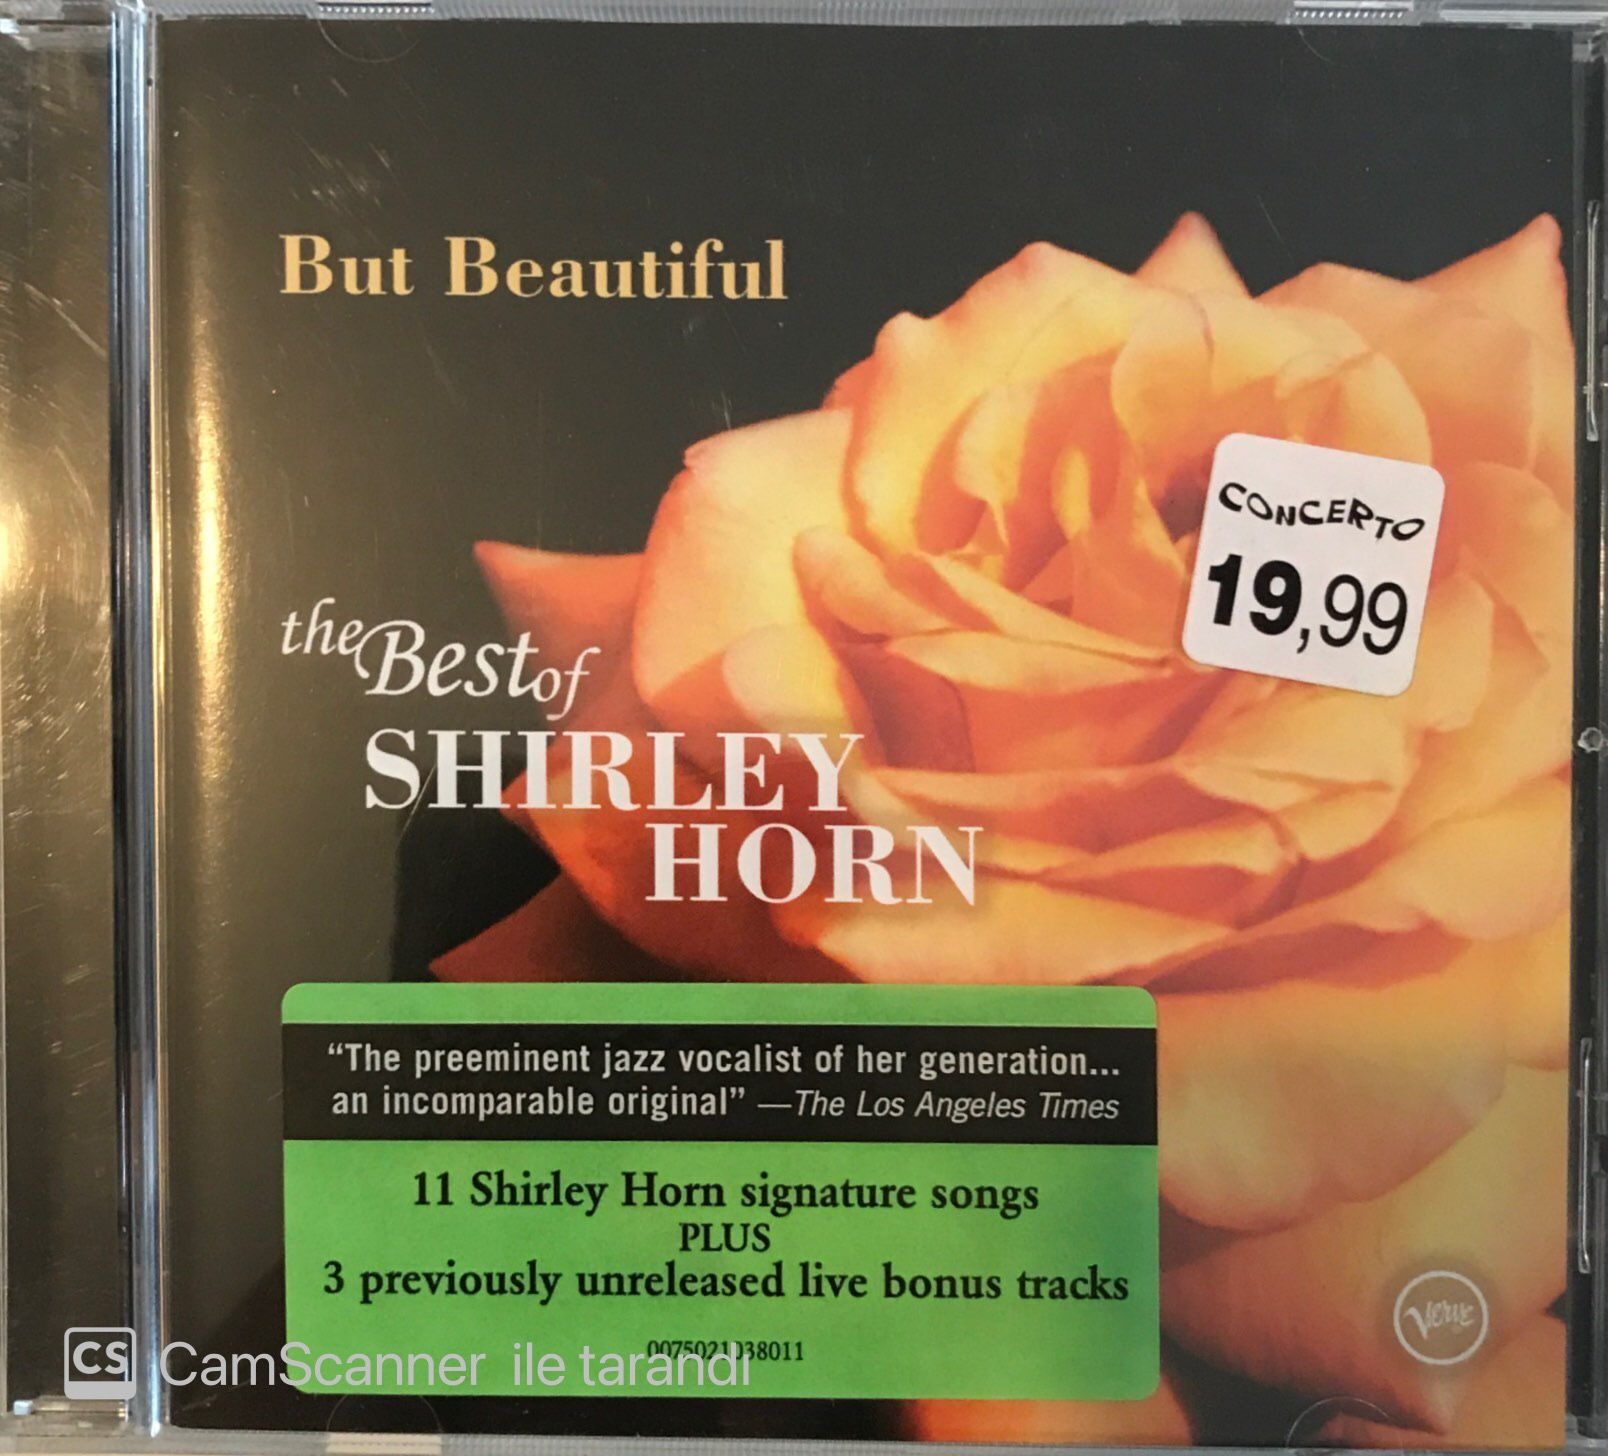 The Best Of Shirley Horn - But Beautiful CD